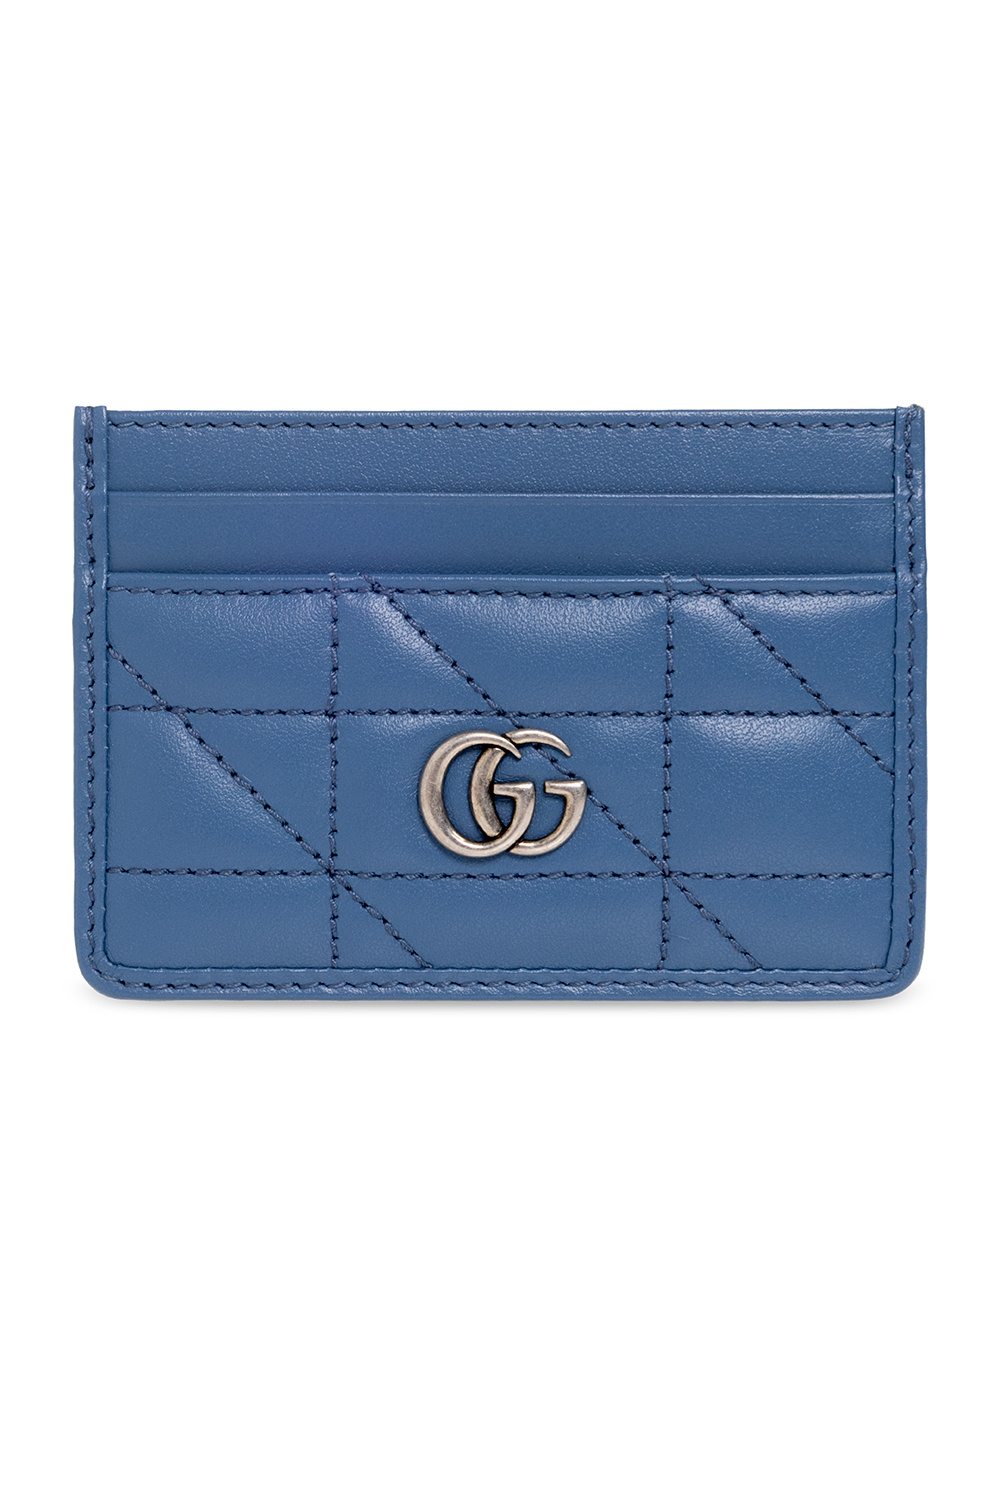 Gucci Leather card holder